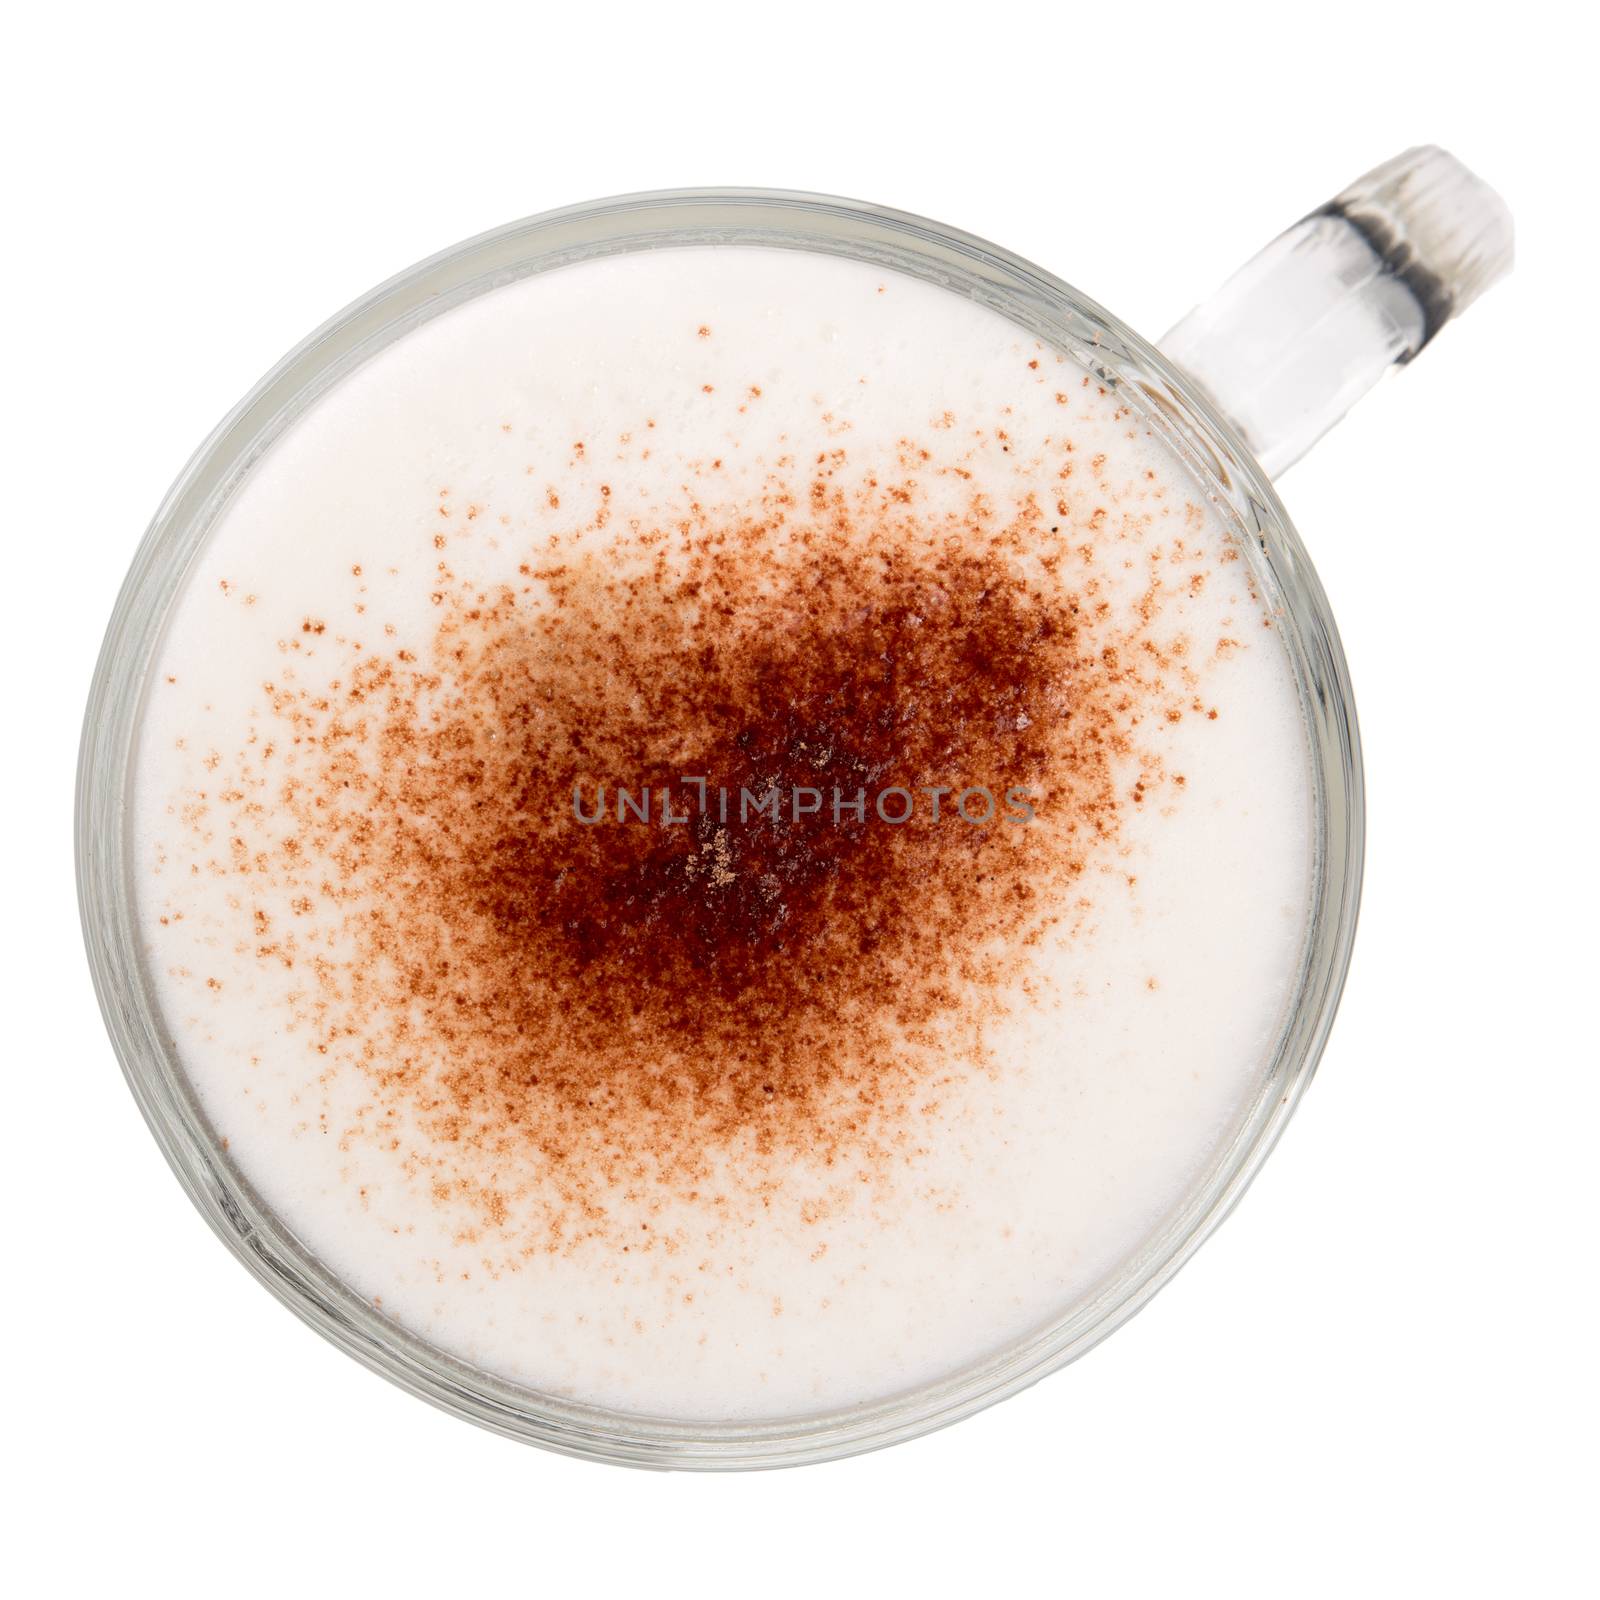 Top view of glass cup mix latte coffee foam, white background